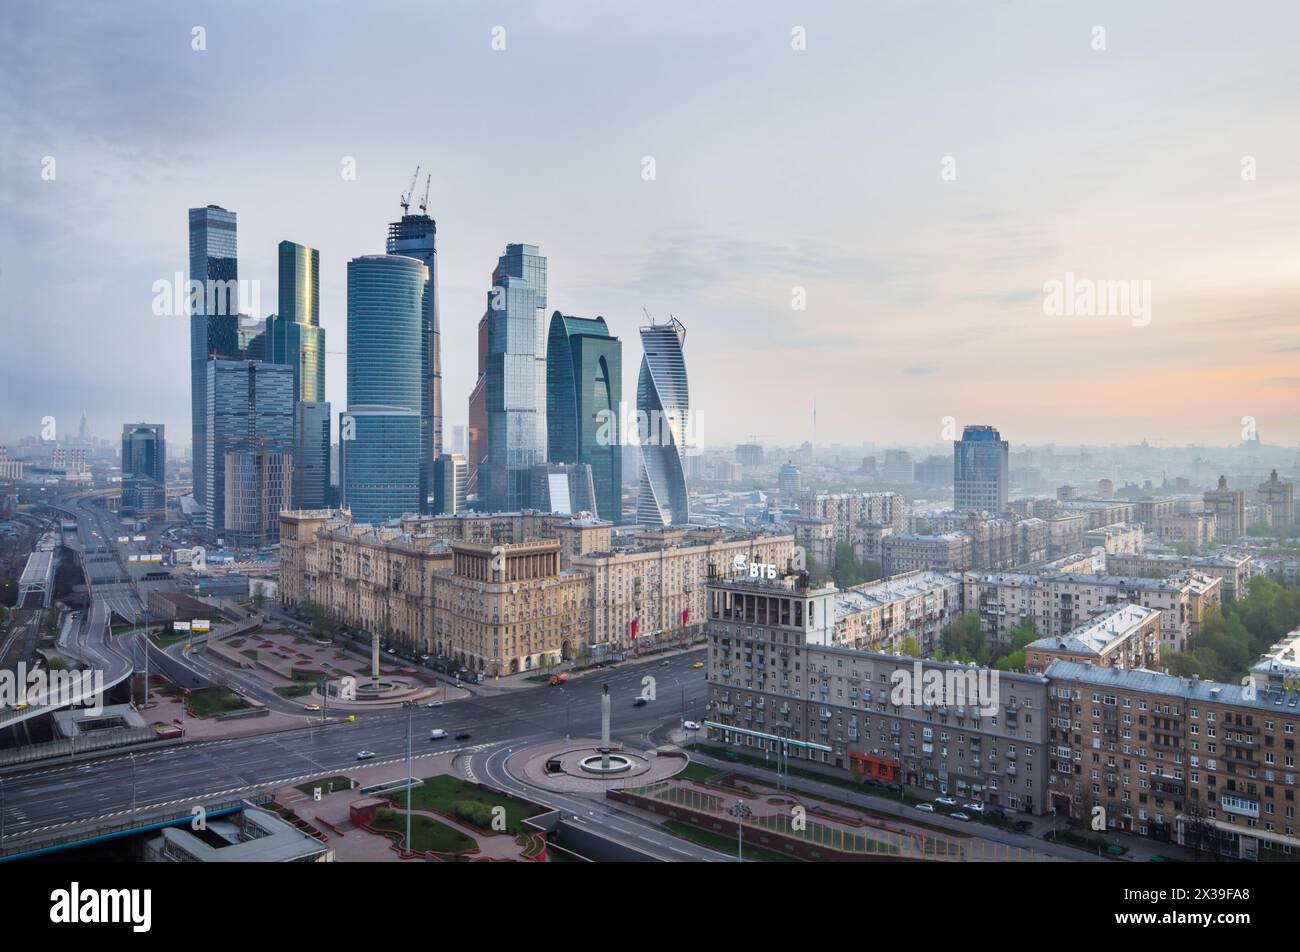 MOSCOW - MAY 3, 2014: Futuristic Moscow International Business Center at morning. Years of construction of complex - 1995-2018 Stock Photo